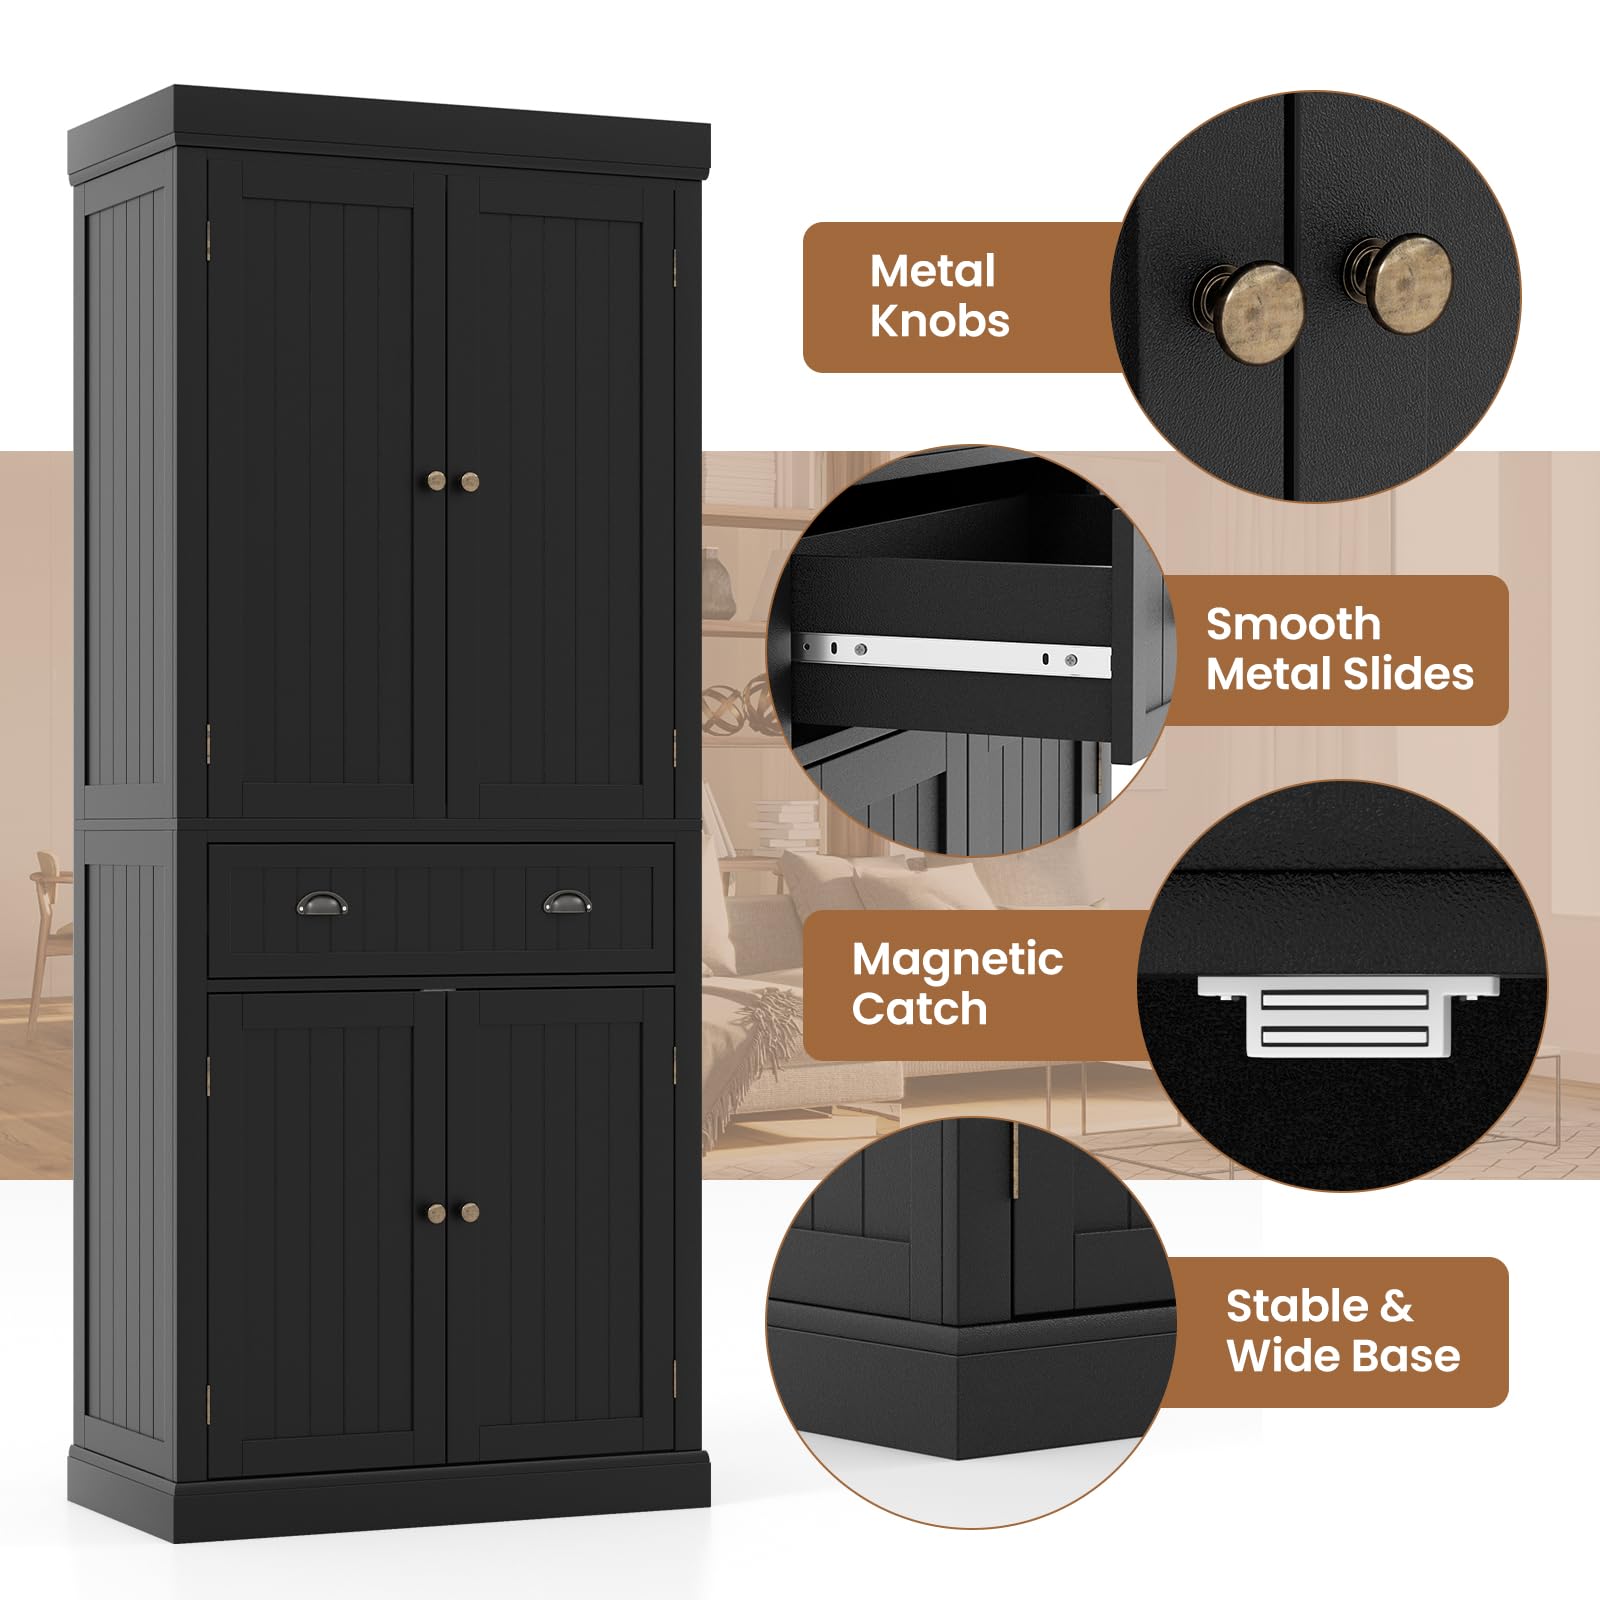 Giantex Pantry Organizers and Storage, 72" Tall Kitchen Cabinet with 2-Door Cabinets & Drawer, Buffet Sideboard